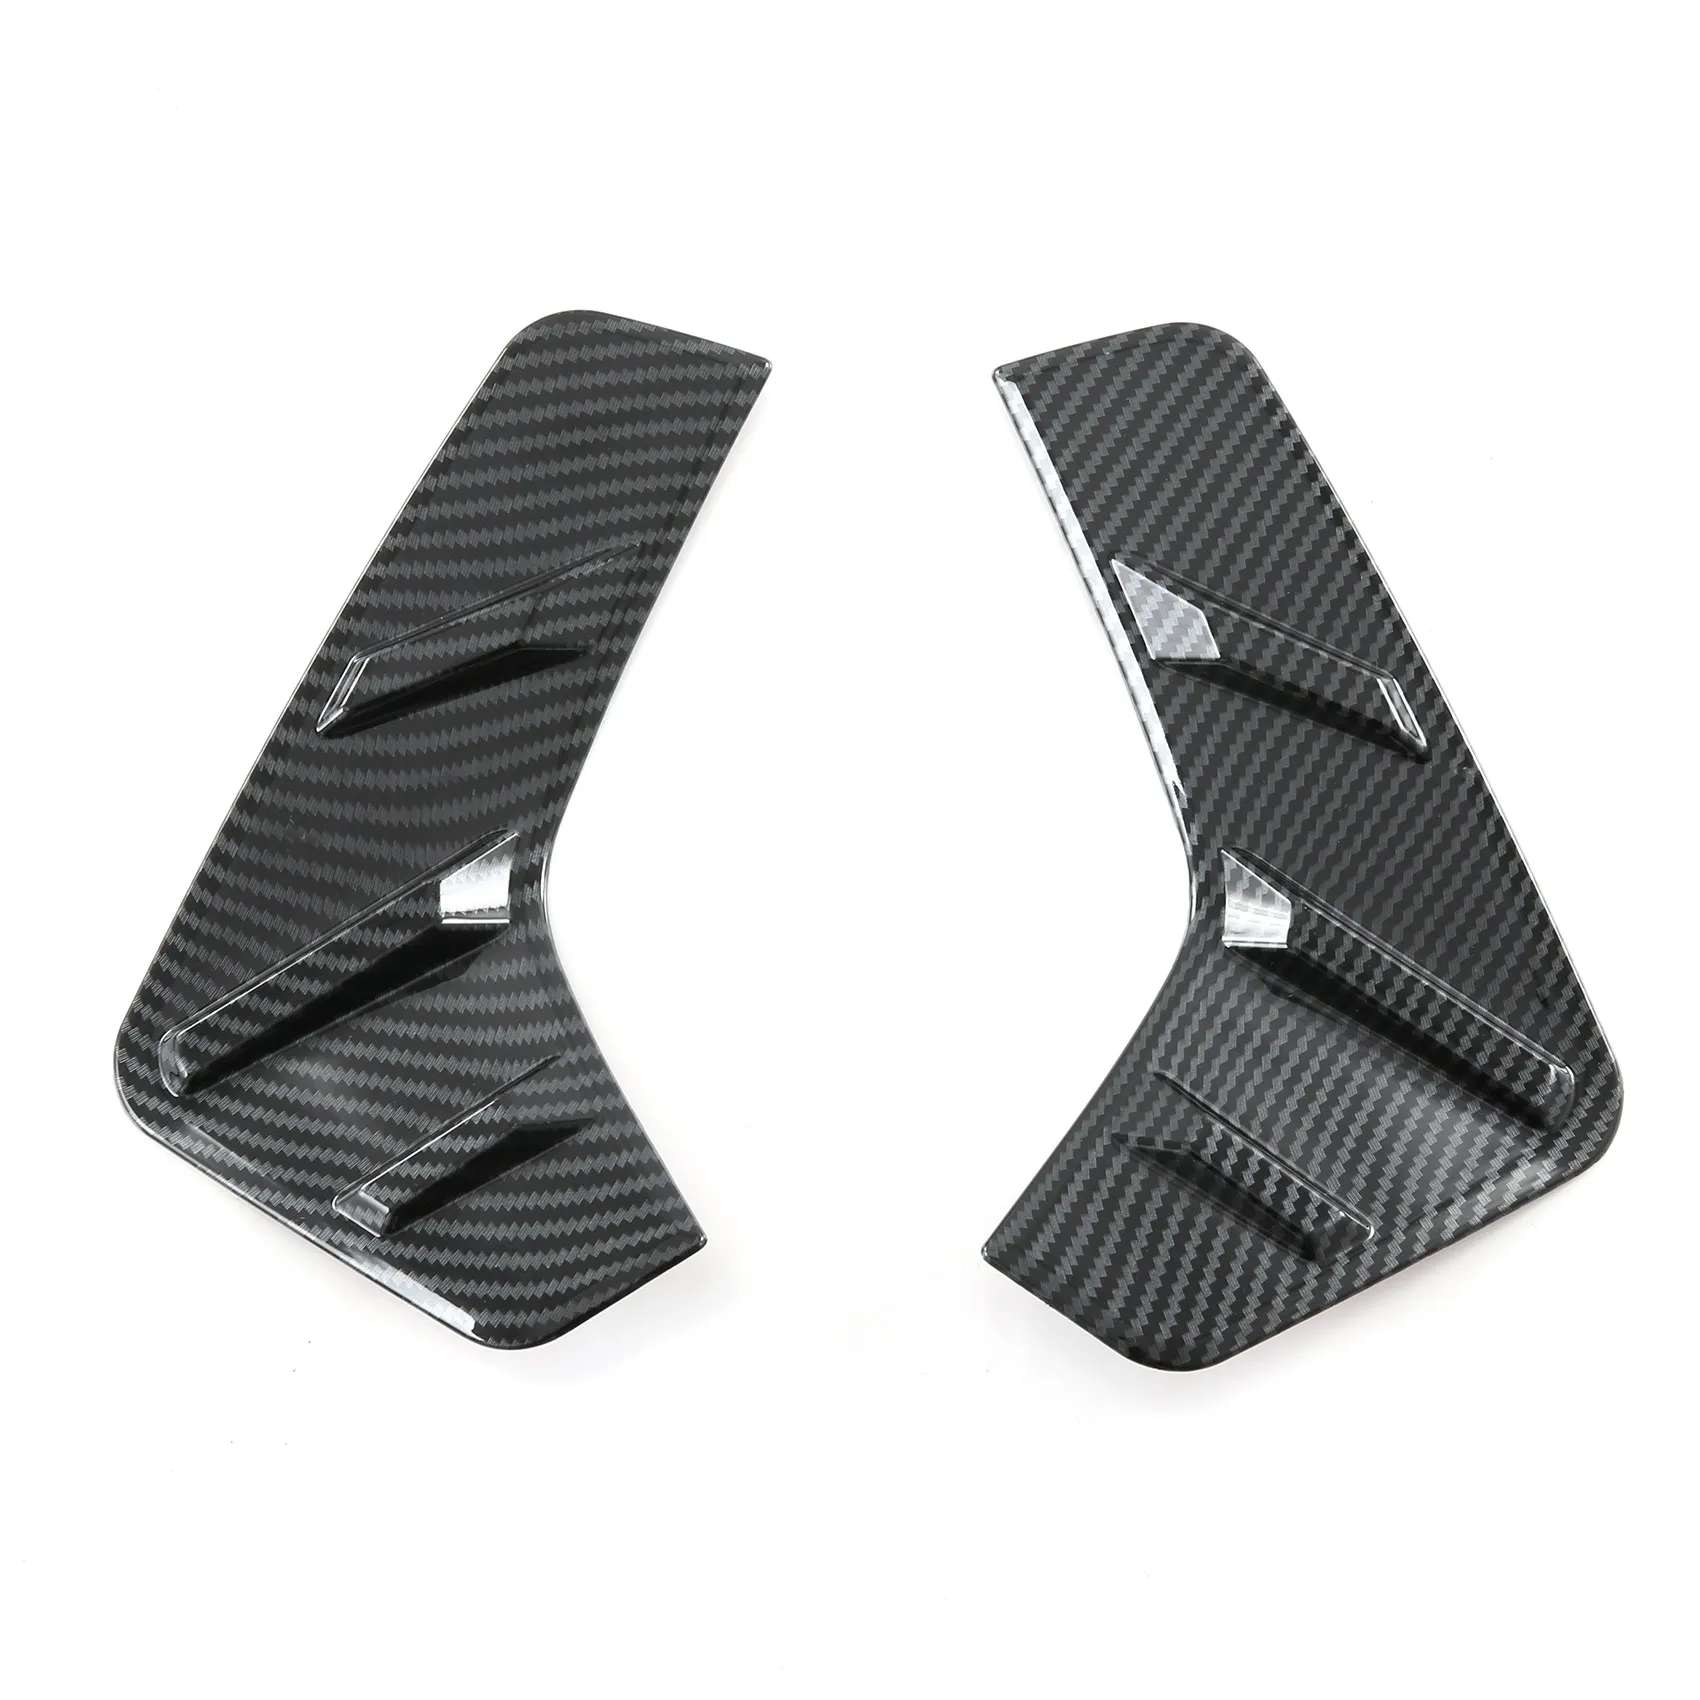 

Car Carbon Fiber ABS Rear Reflector Fog Light Lamp Cover Trim Stickers for BYD ATTO 3 Yuan Plus 2022